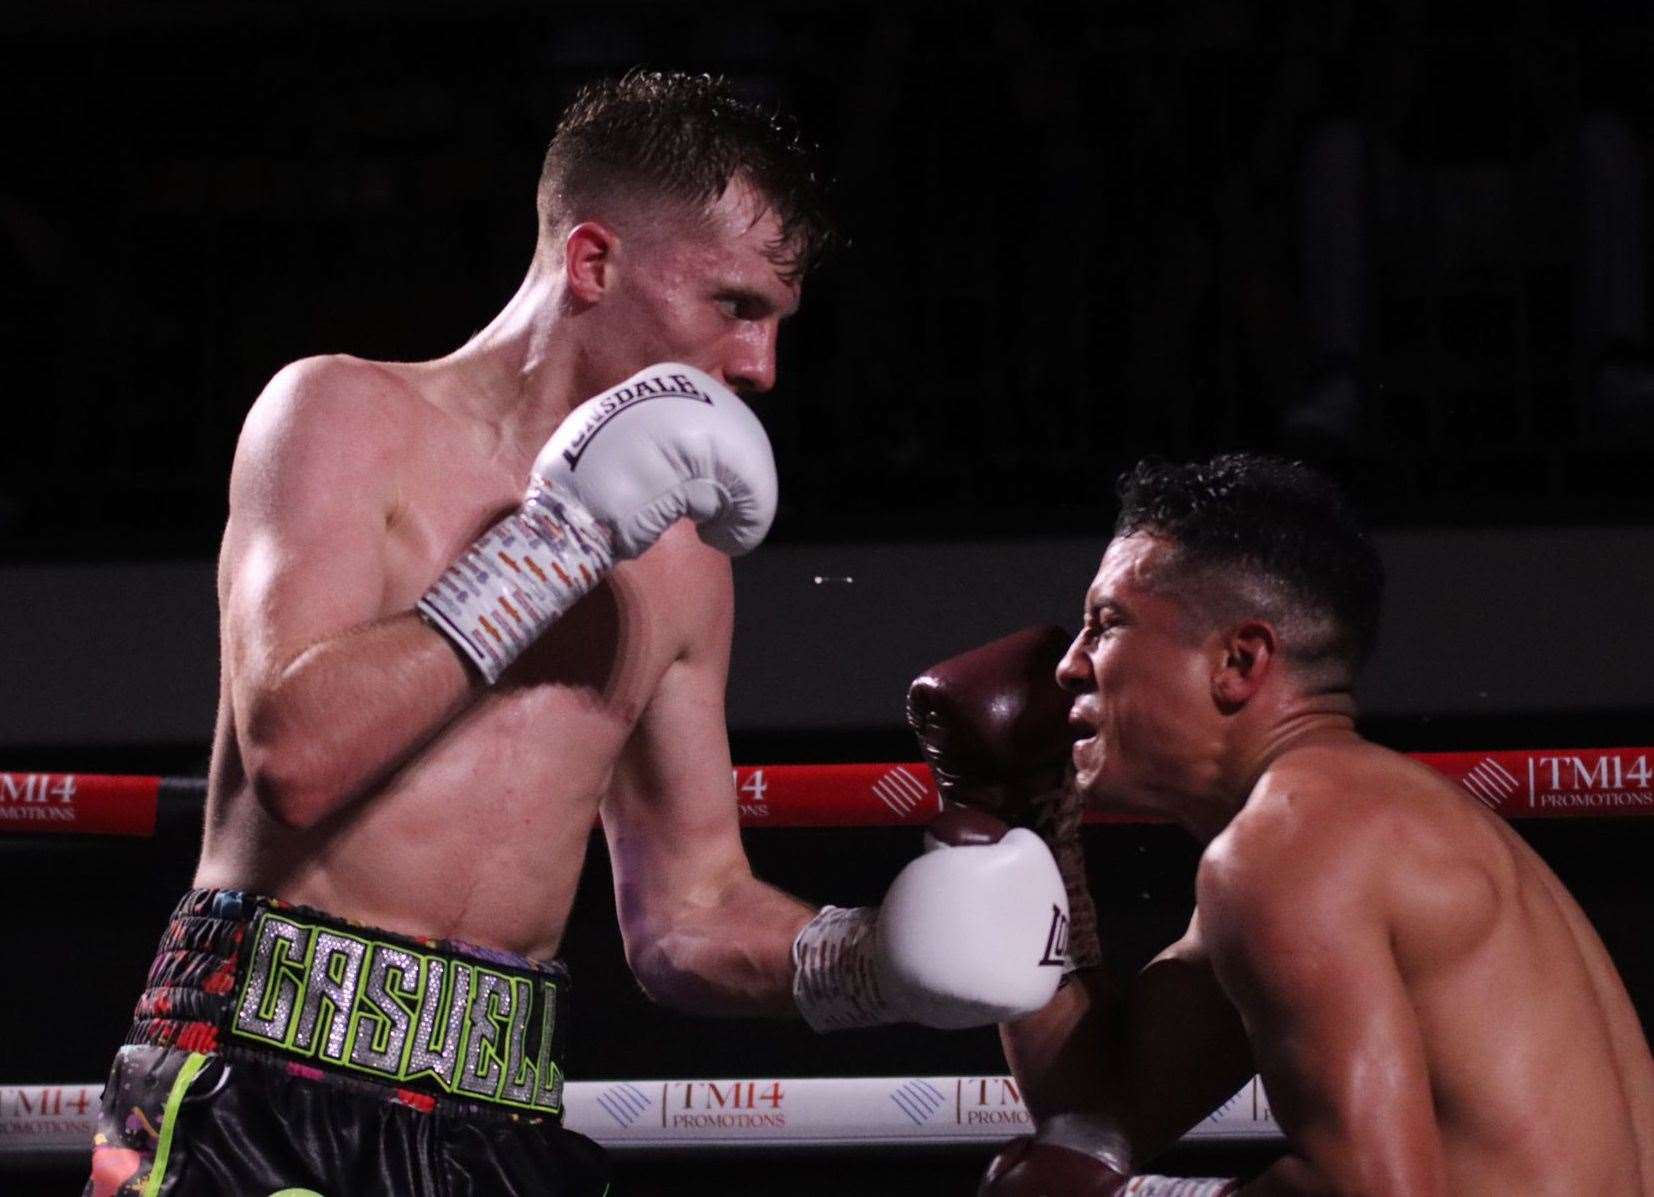 Robert Caswell beat Jayro Fernando Duran on points at York Hall in his last fight Picture: Max English @max_ePhotos